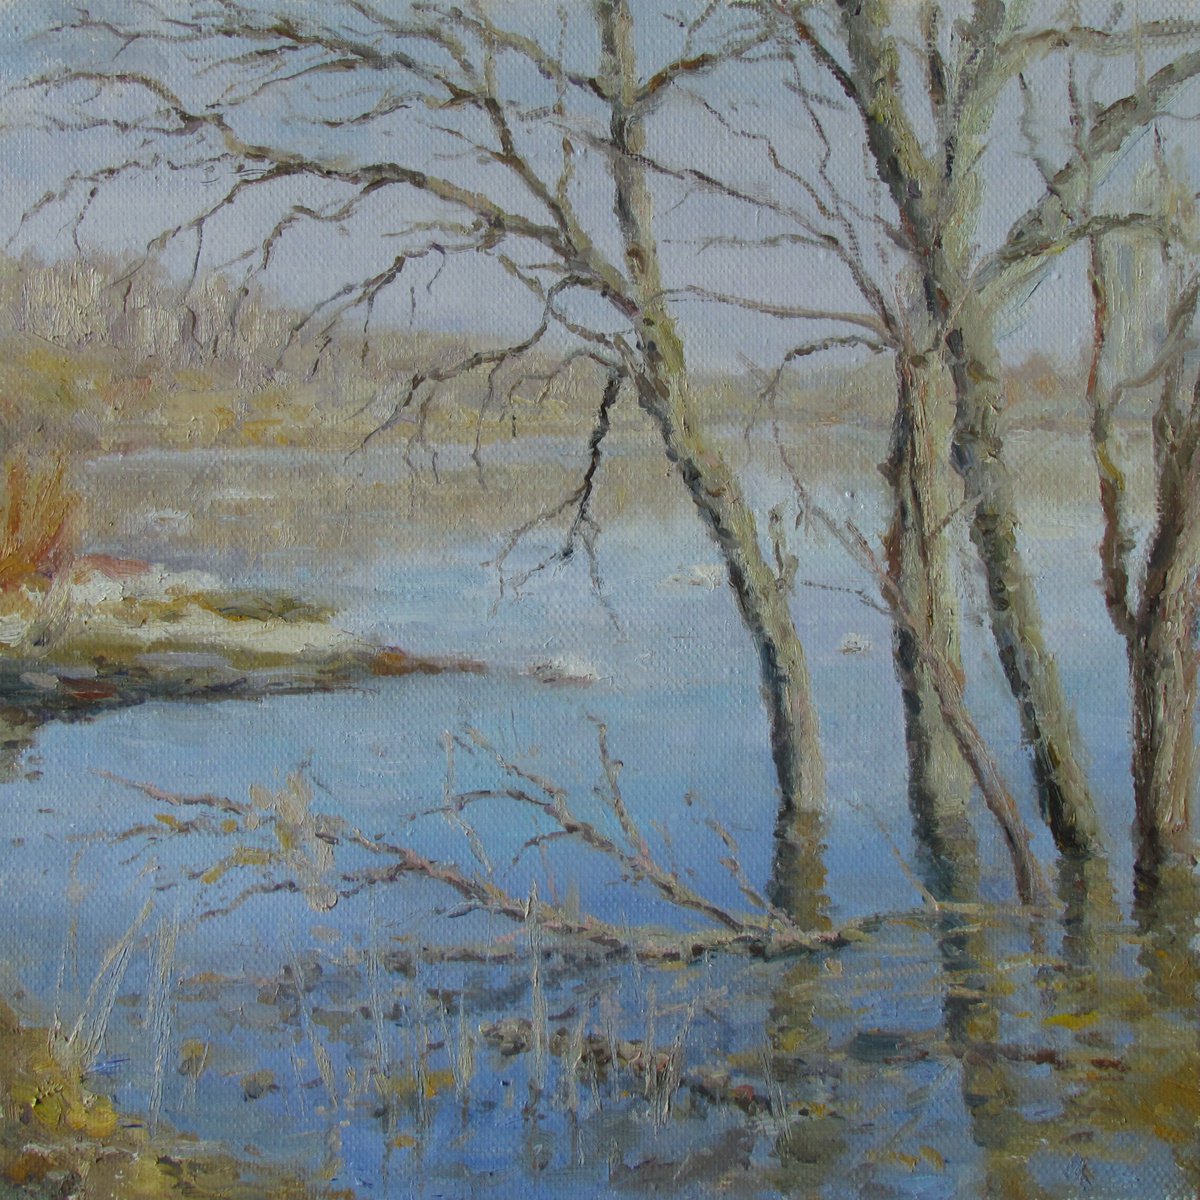 The Sunny Spring Day - river spring landscape painting by Nikolay Dmitriev